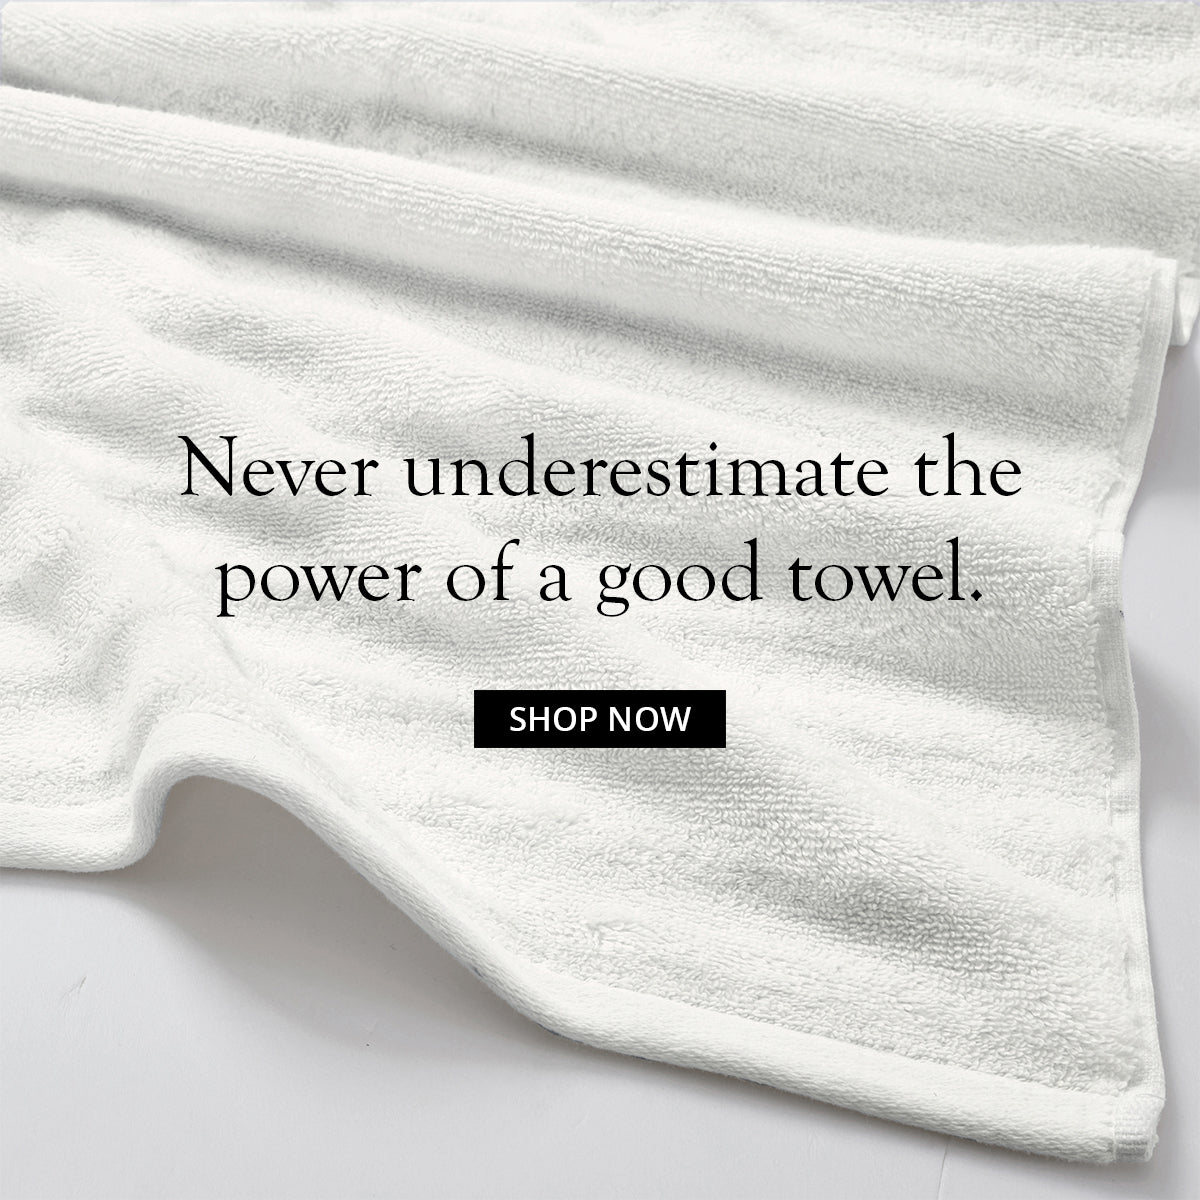 Never underestimate the power of a good towel